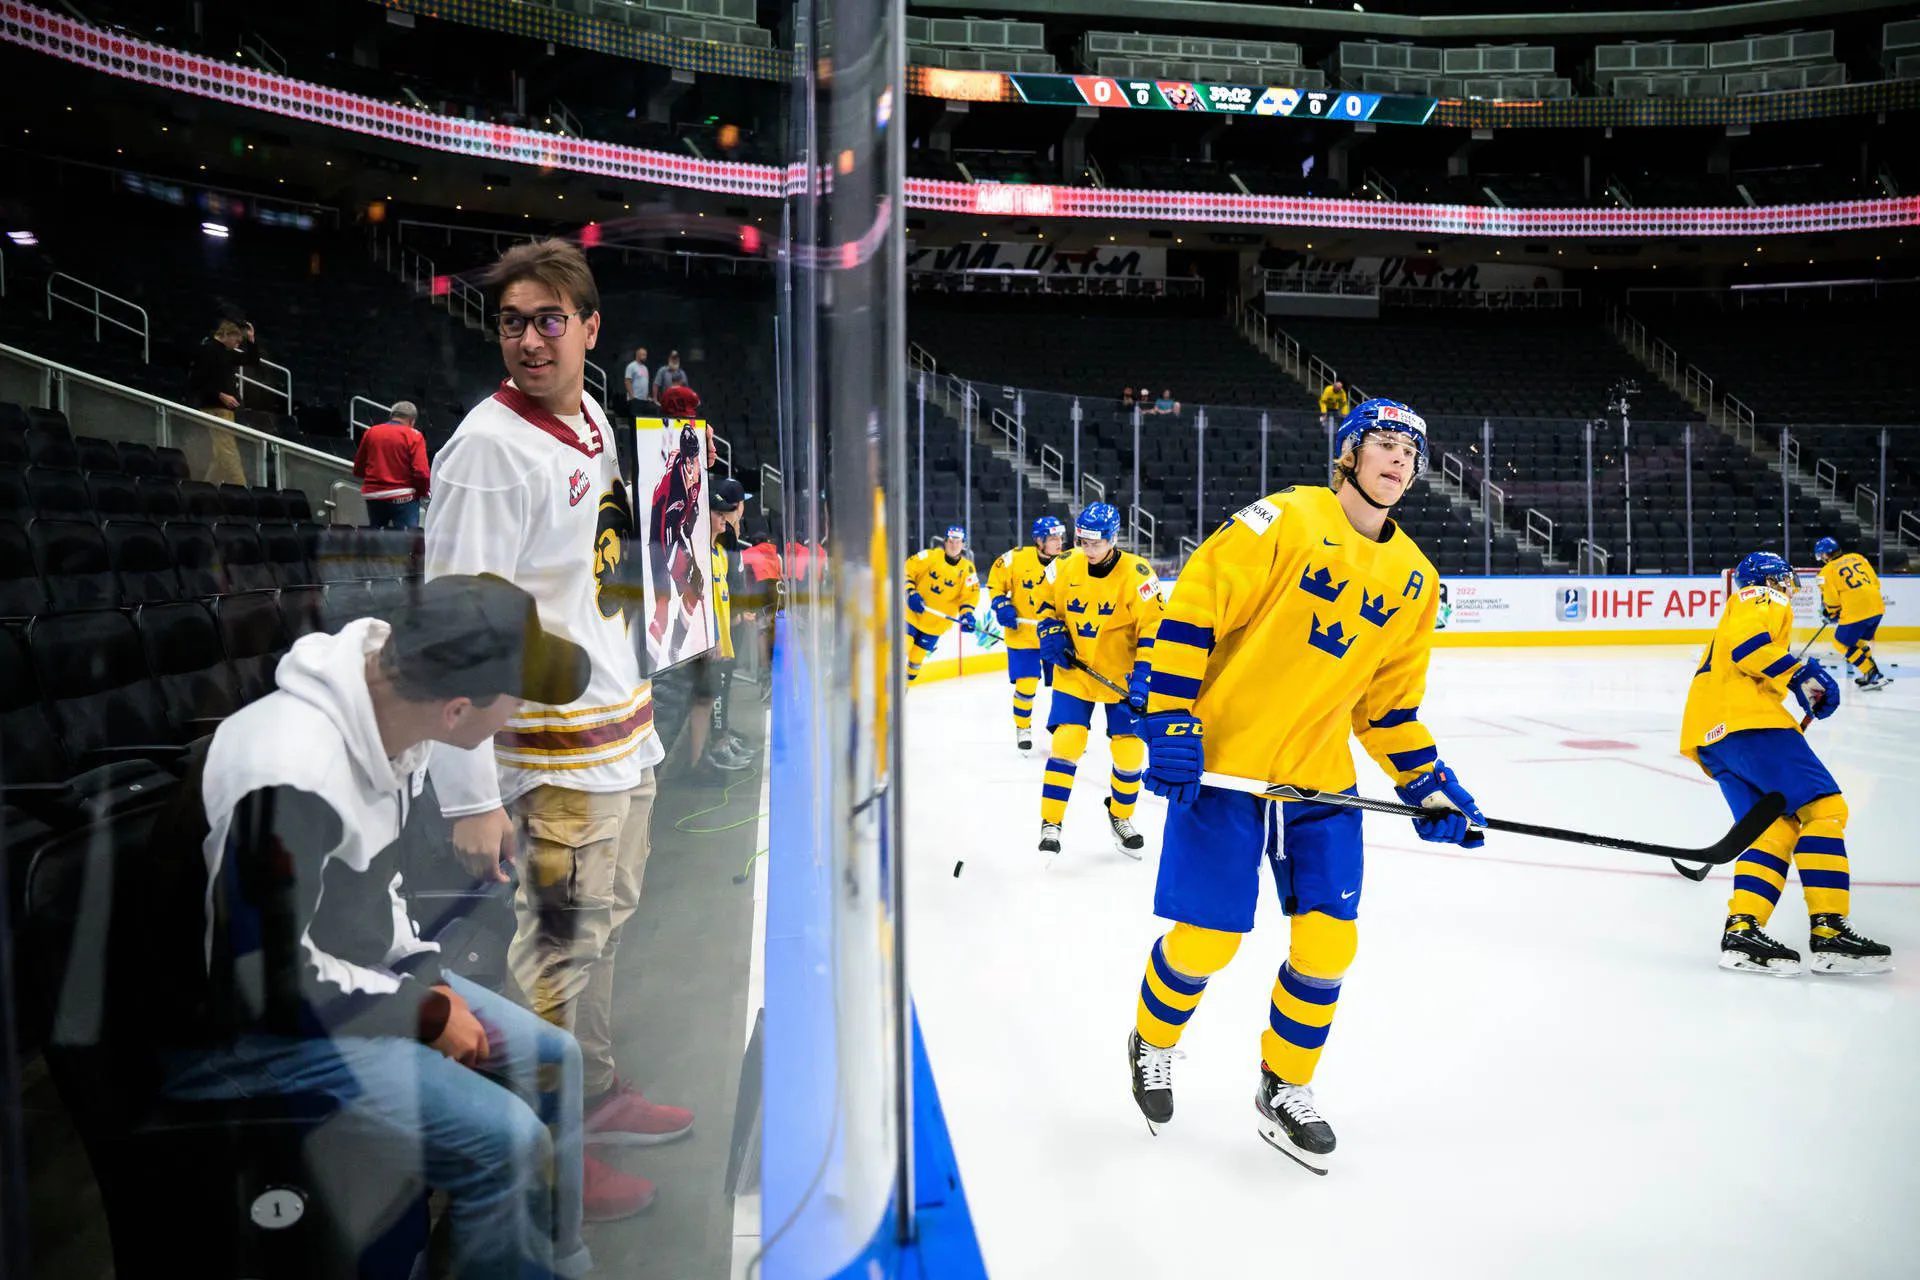 World Juniors Day 4 Recap: Edvinsson steady as Swedes cruise to victory over Team Austria